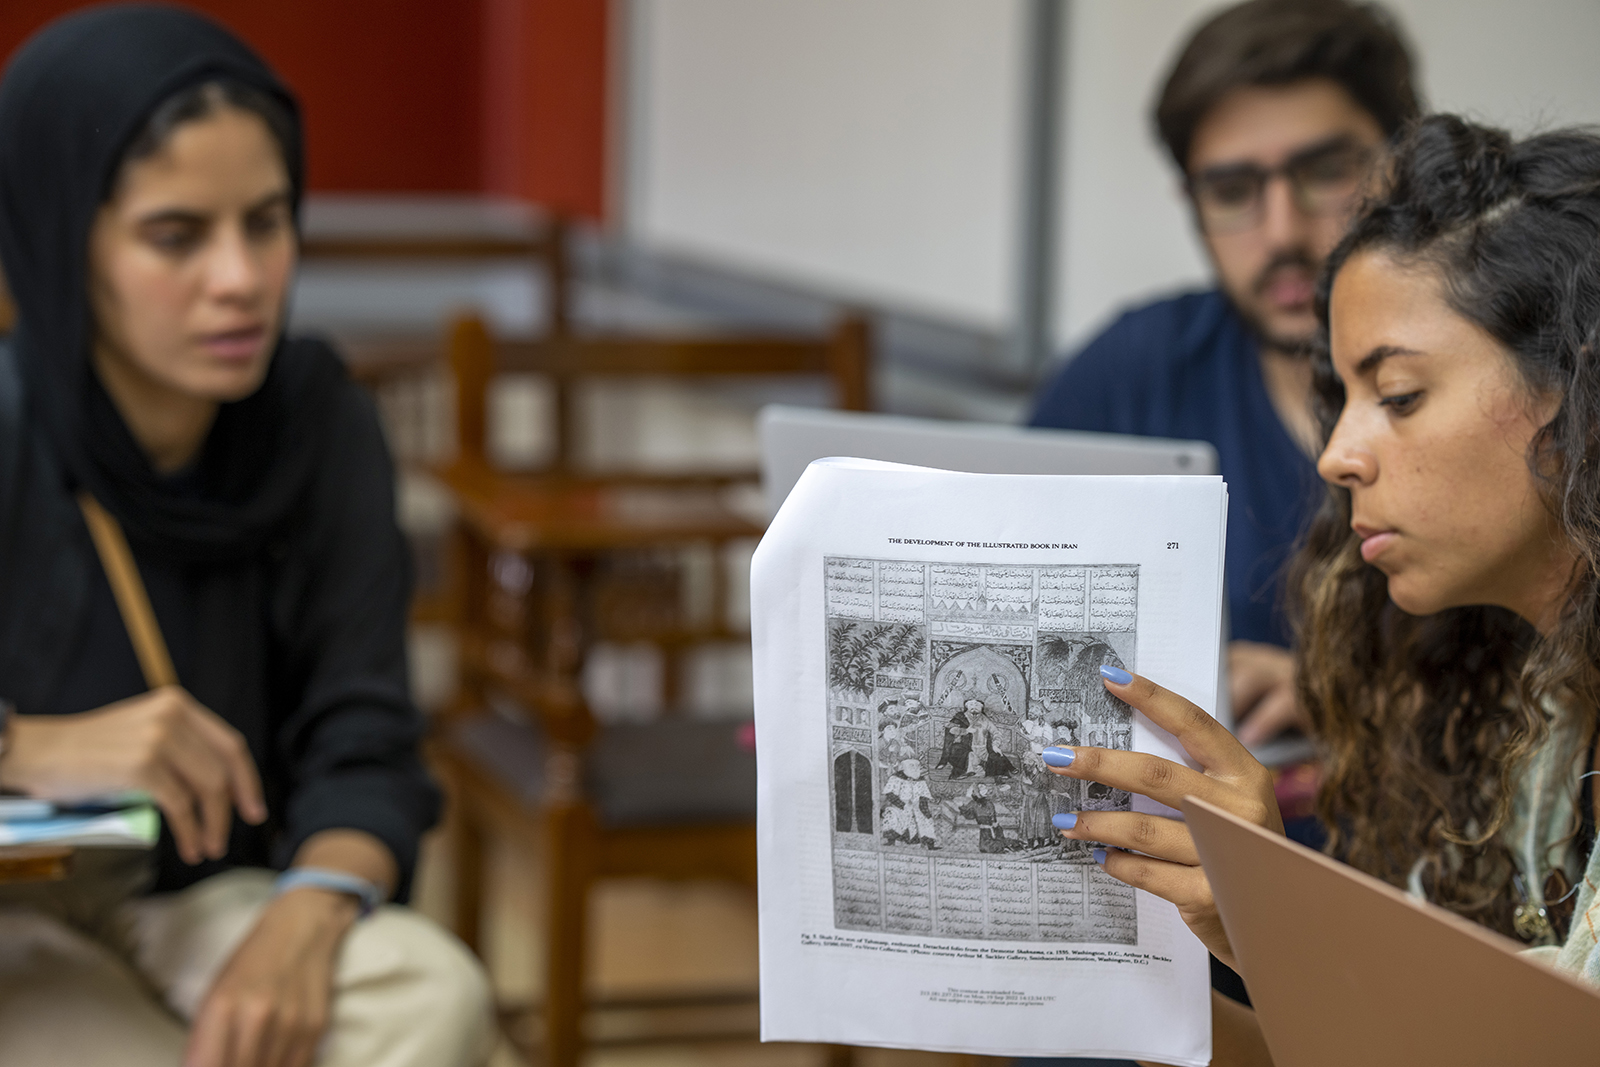 A student explaining Arabic literature in a paper document